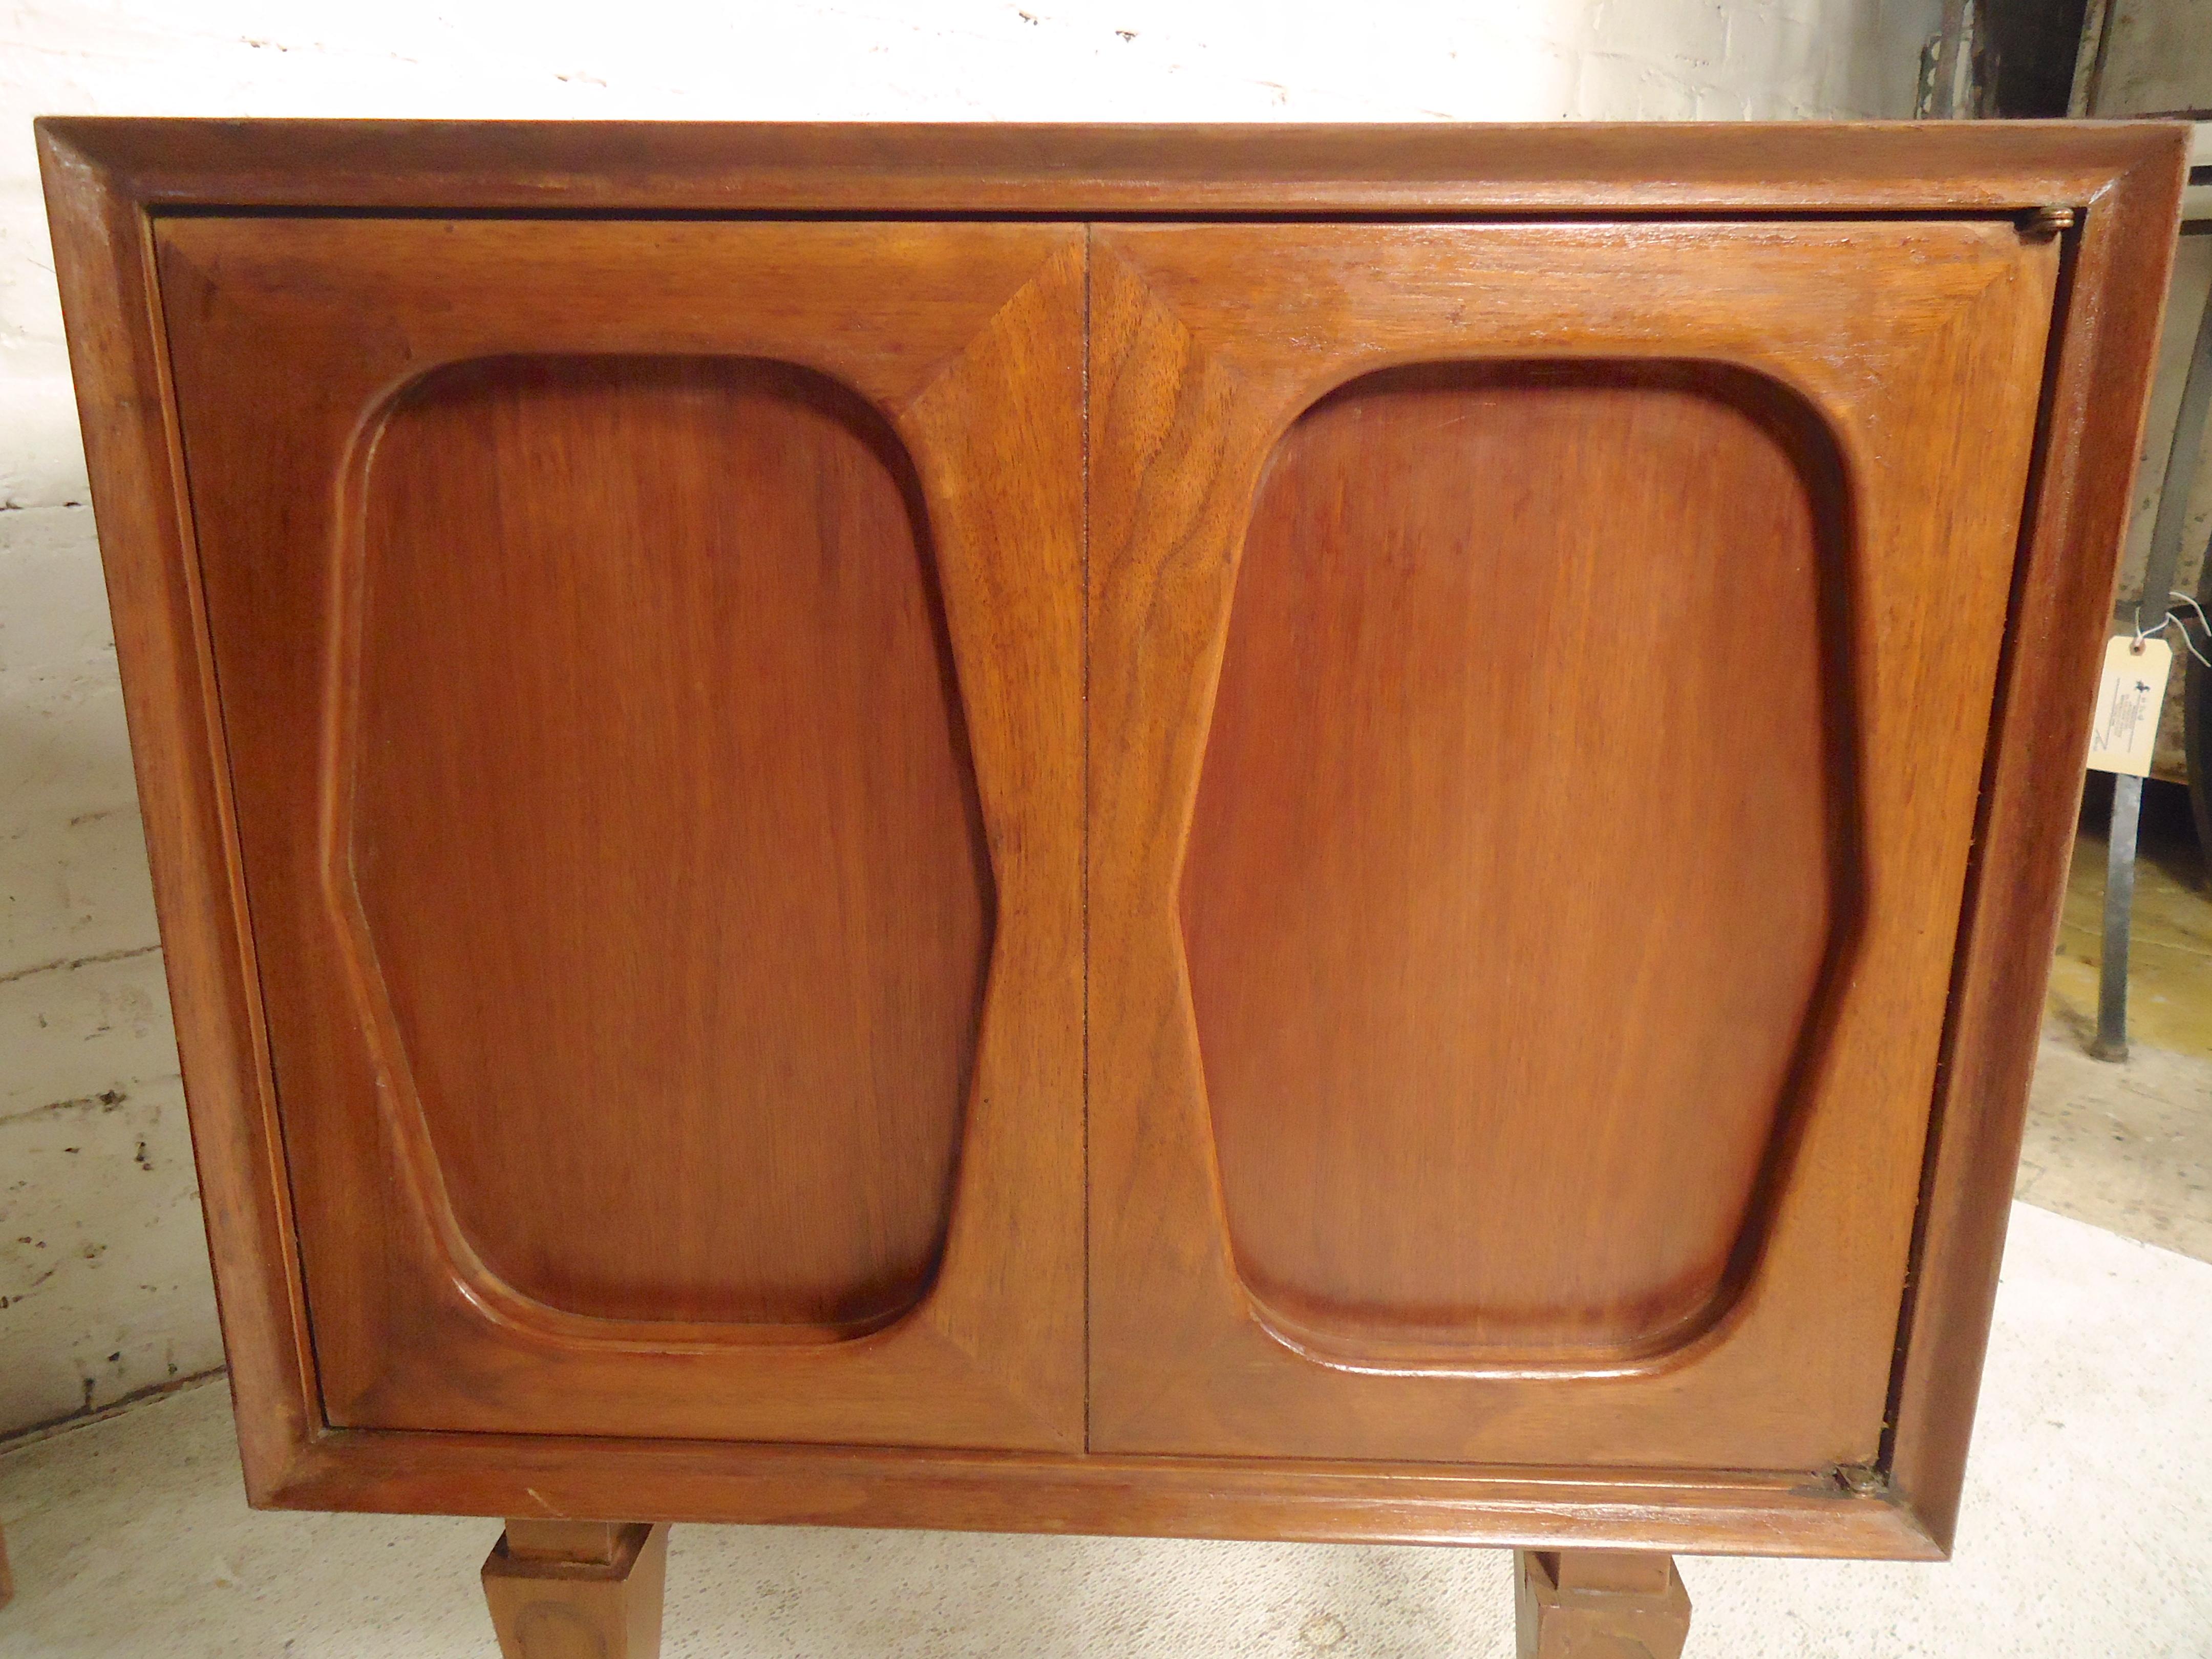 Vintage modern nightstands with sculpted doors and tapered legs. Inside storage space with shelf.

(Please confirm item location - NY or NJ - with dealer).
  